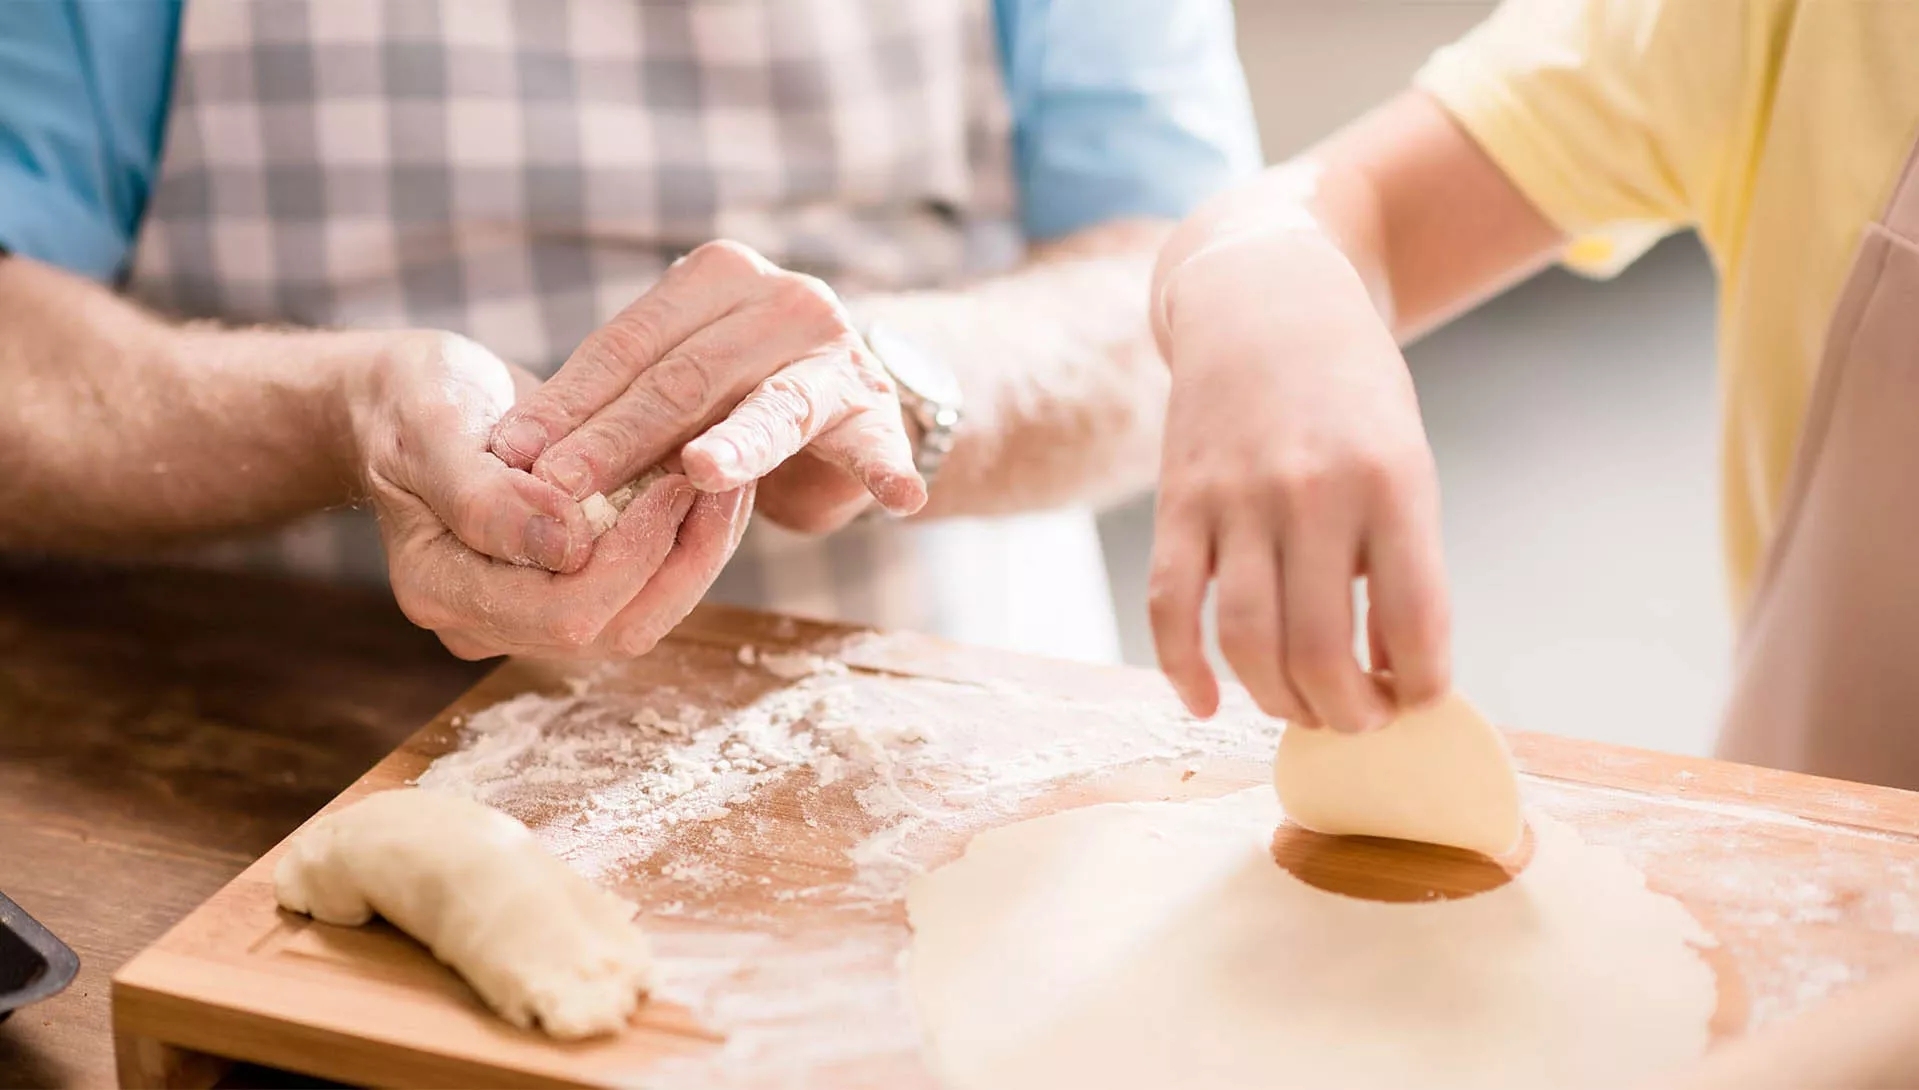 Two people mixing dough